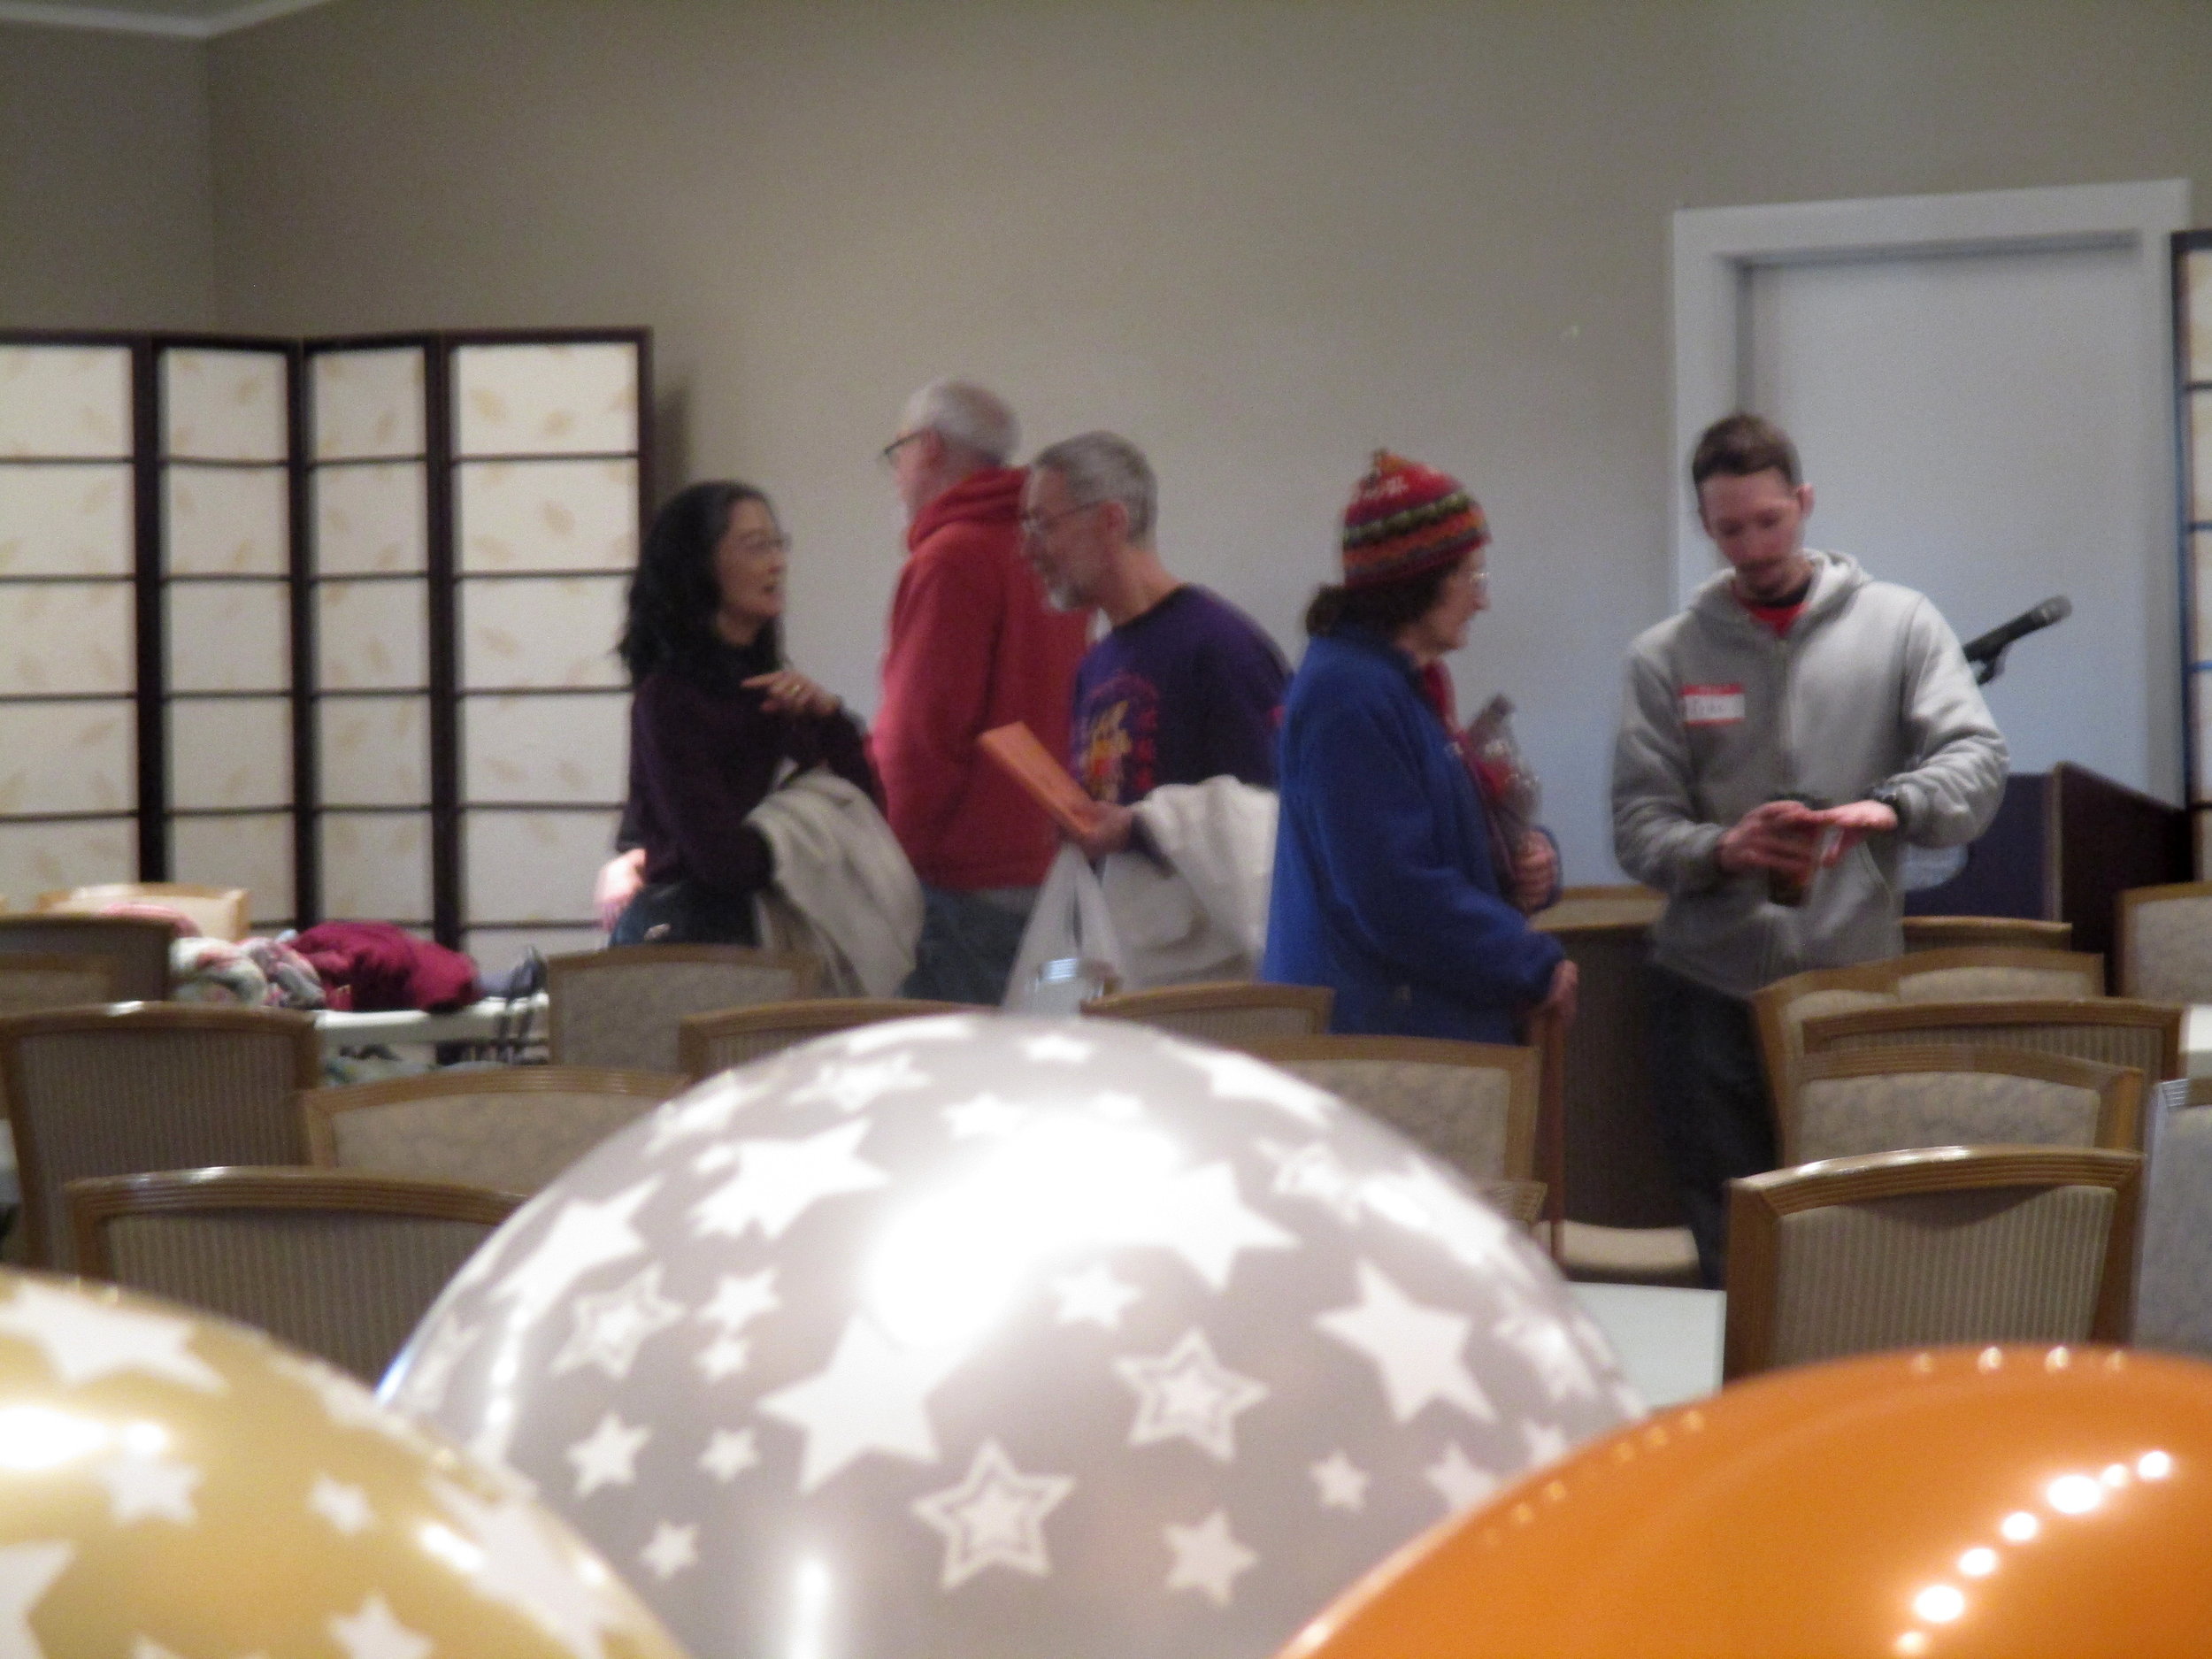 Party Balloons and departing guests